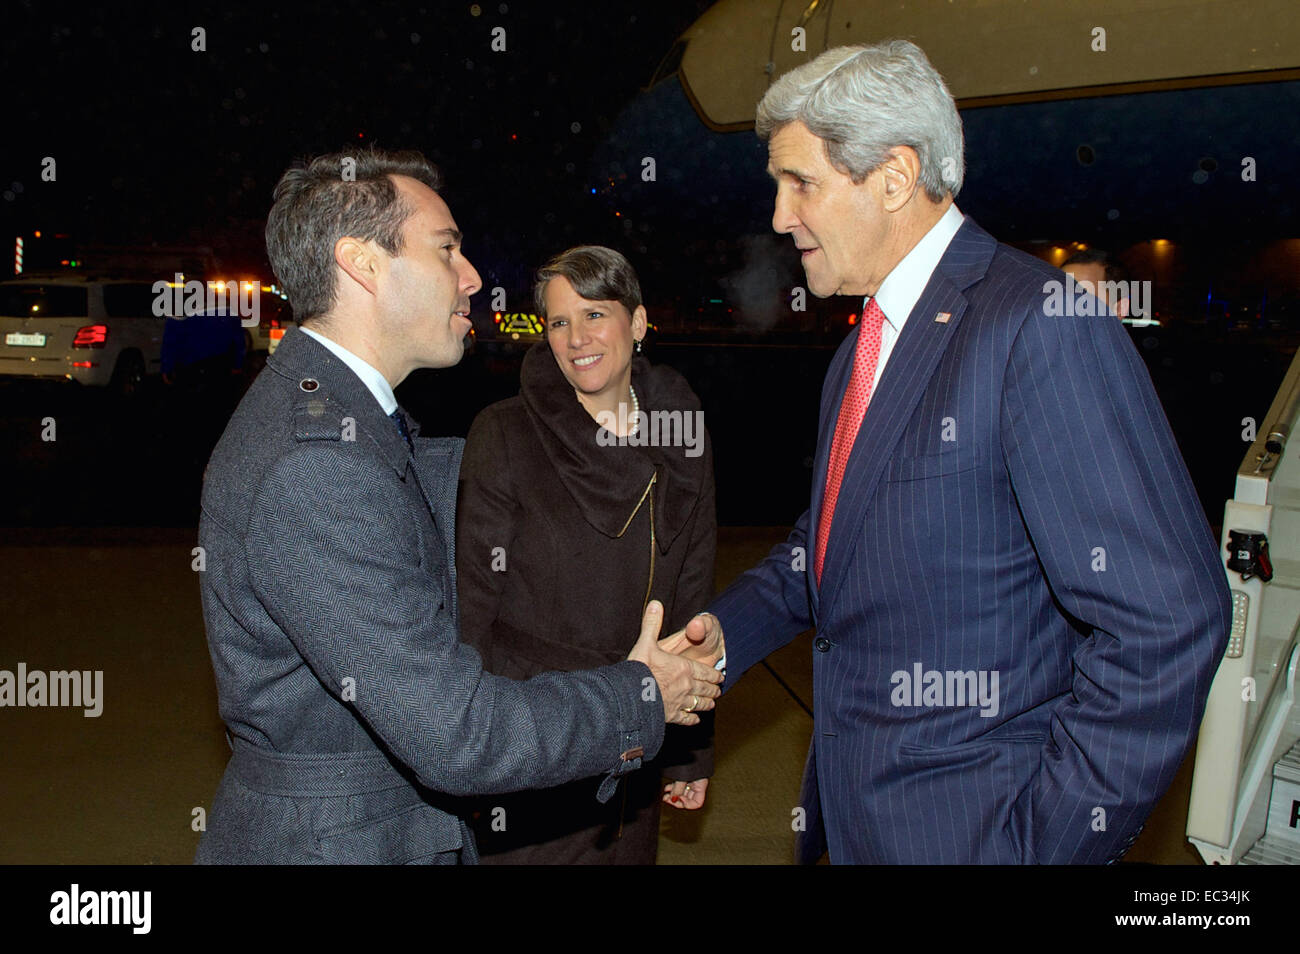 U.S. Ambassador to the Organization for Security and Cooperation in Europe Daniel Baer, joined by U.S. Ambassador to Switzerland Suzan &quot;Suzi&quot; LeVine, greets U.S. Secretary of State John Kerry as he arrives in Basel, Switzerland, on December 3, 2014, for a series of OSCE meetings. Stock Photo